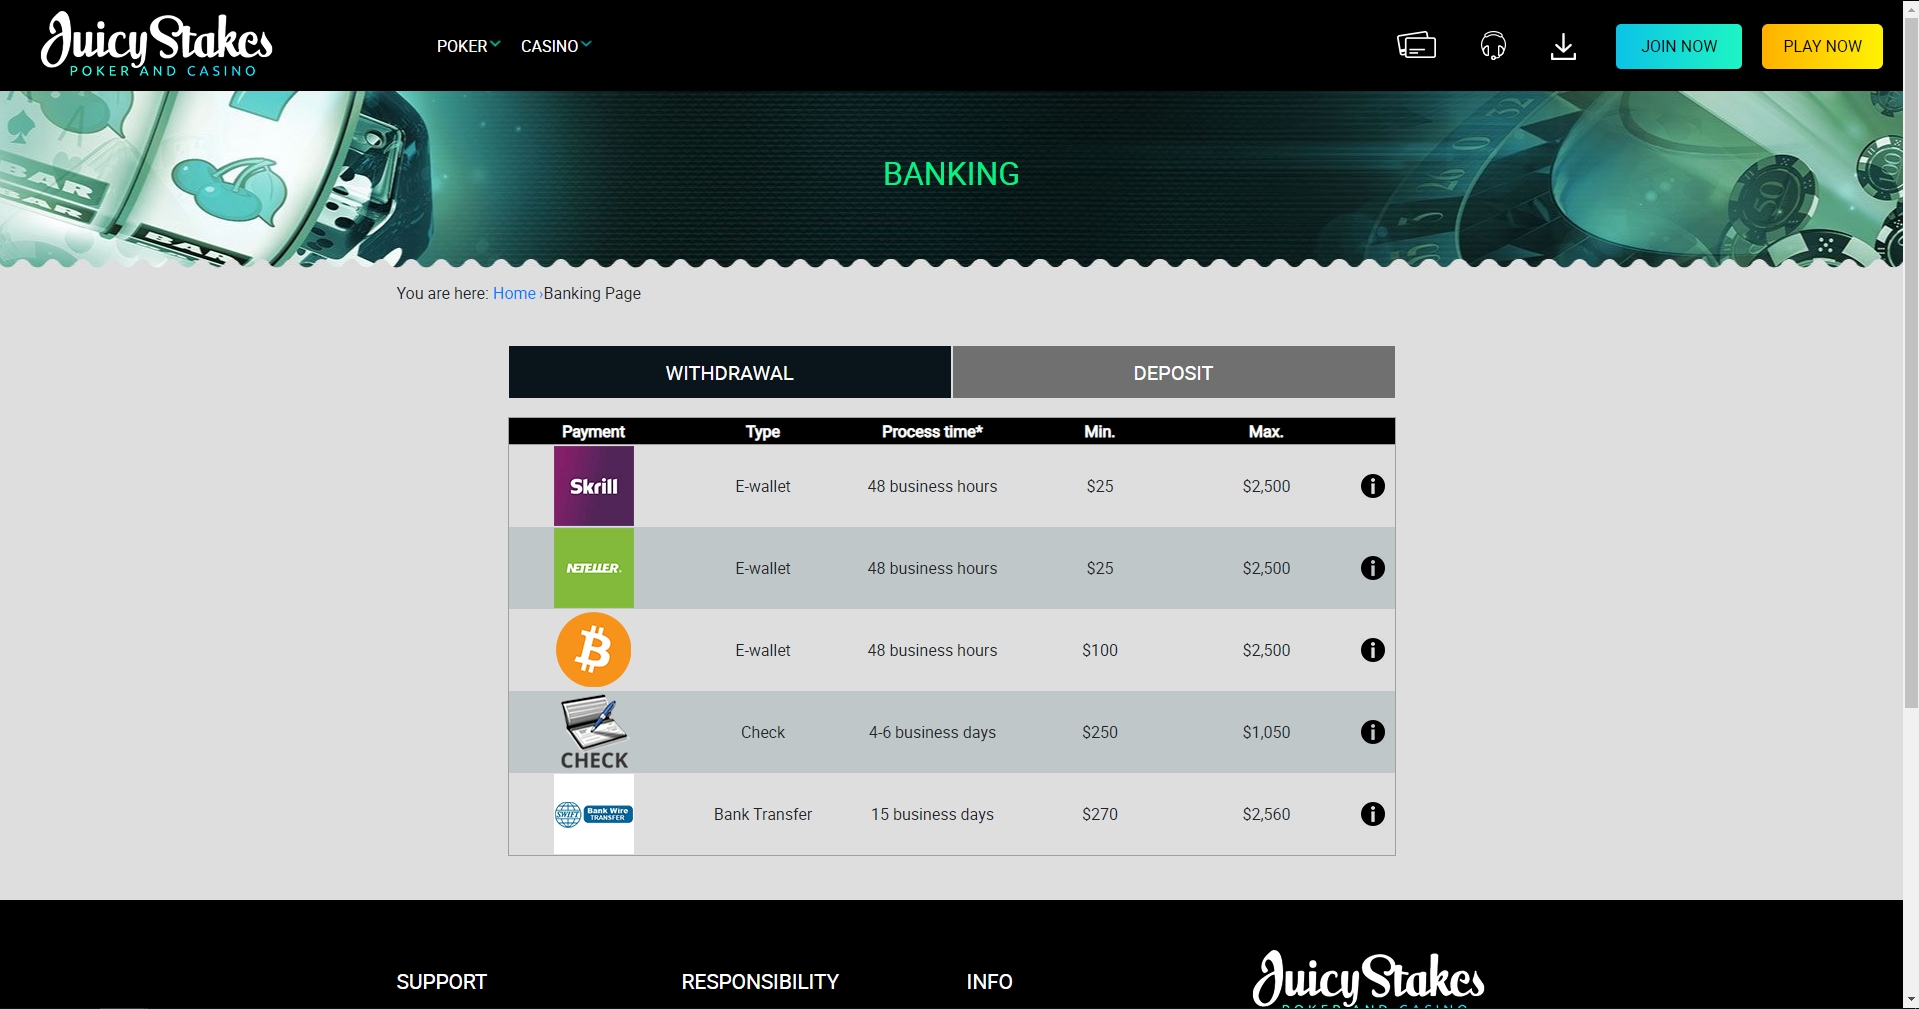 Juicy Stakes Casino Payment Methods